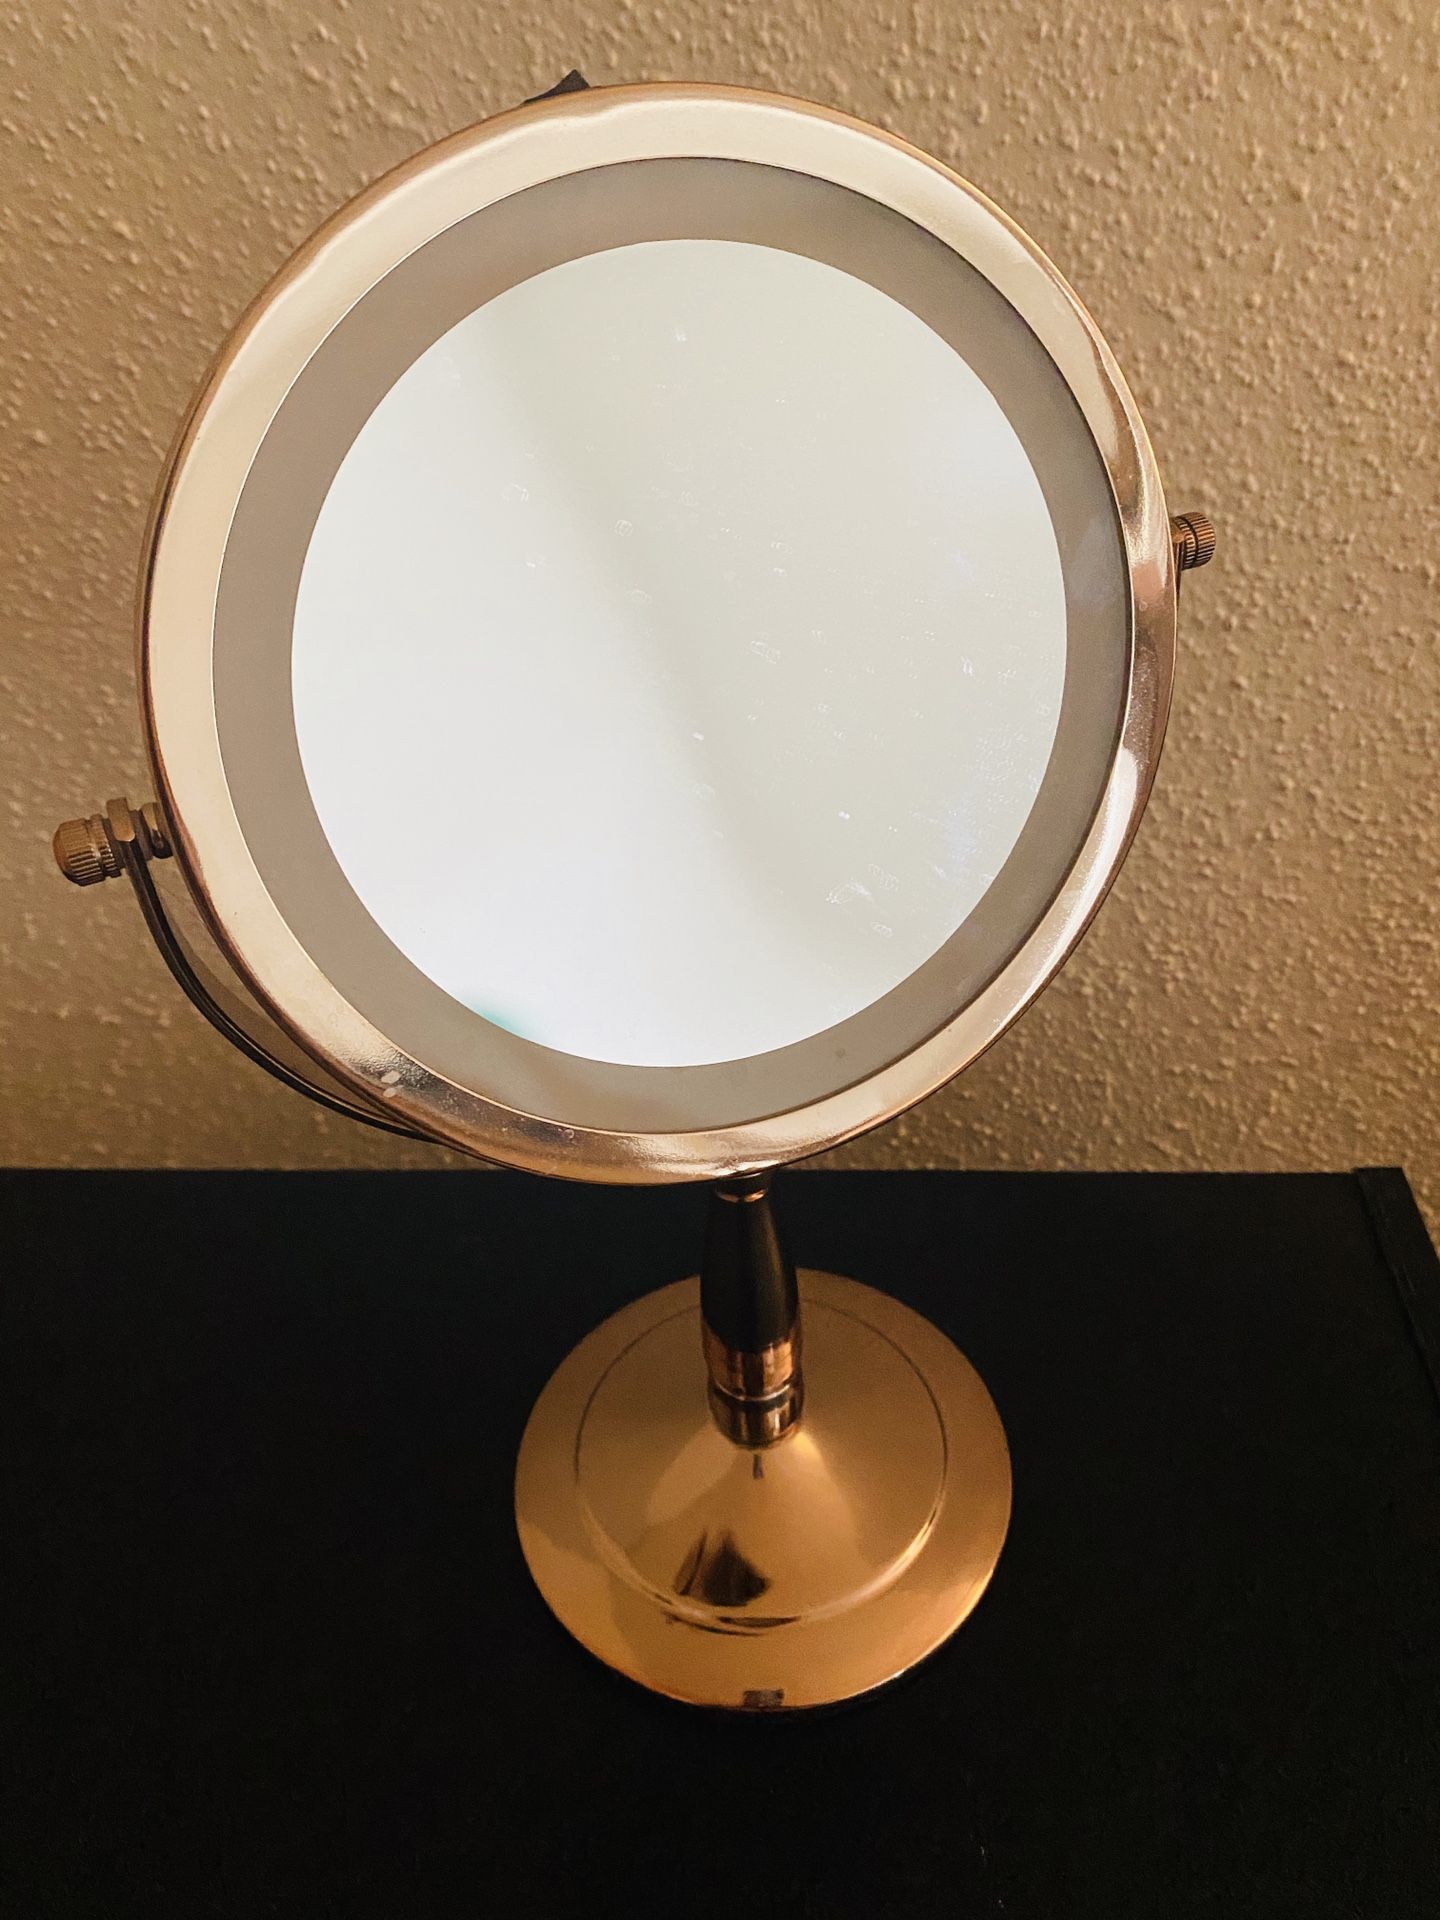 Double sided battery powered vanity makeup mirror